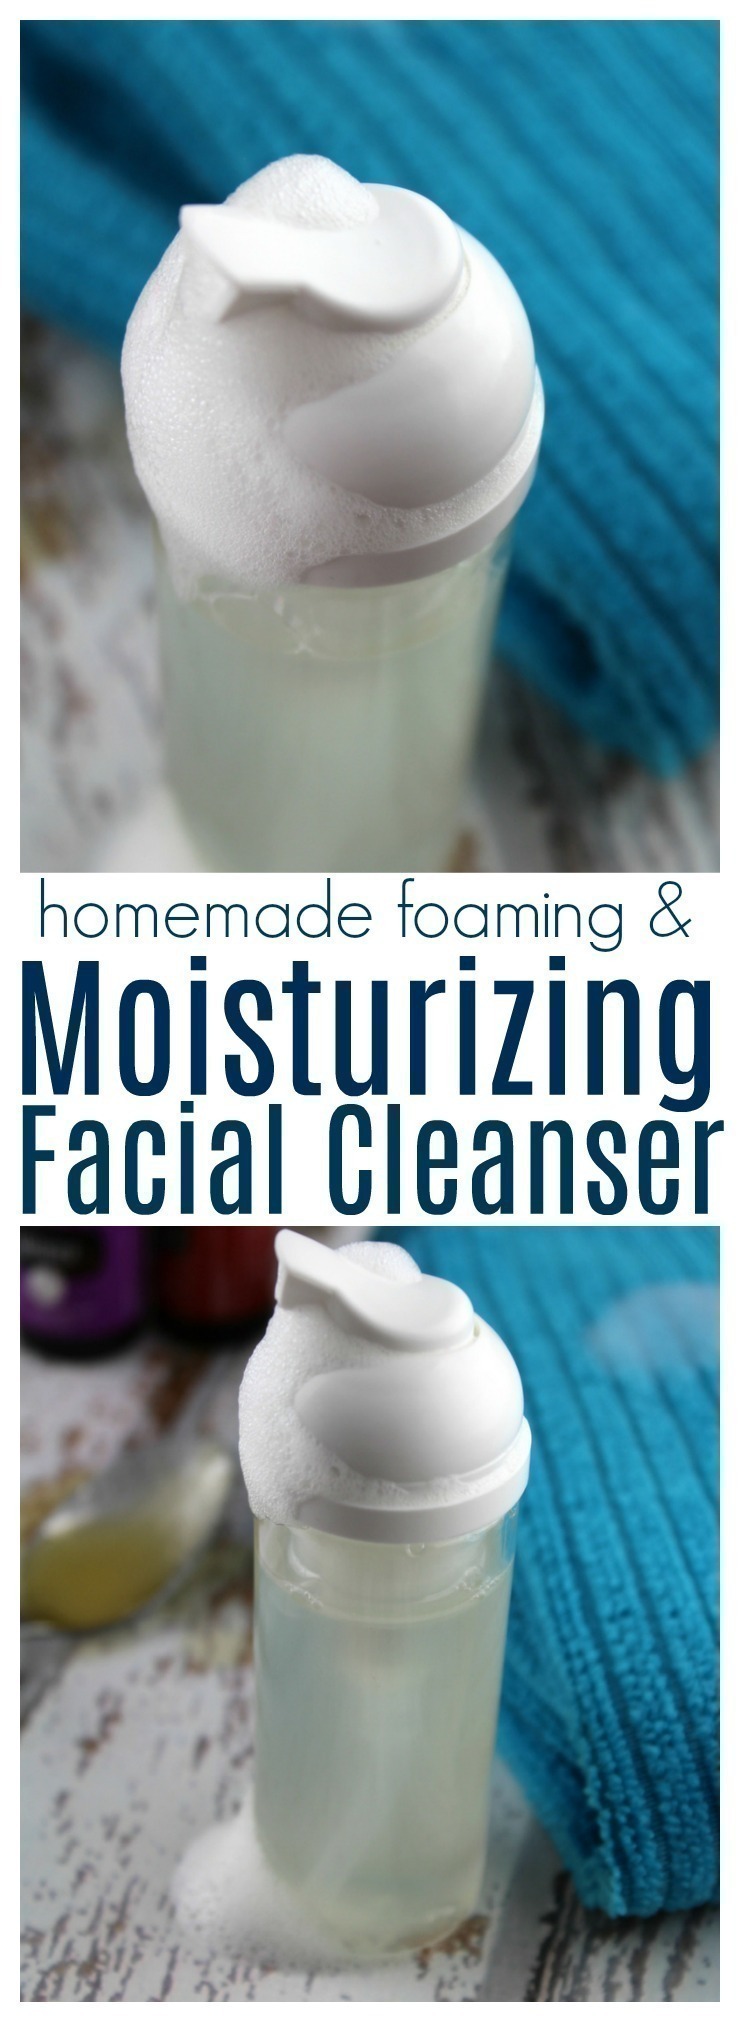 With just 3 ingredients + distilled water, you can make your own moisturizing facial cleanser.